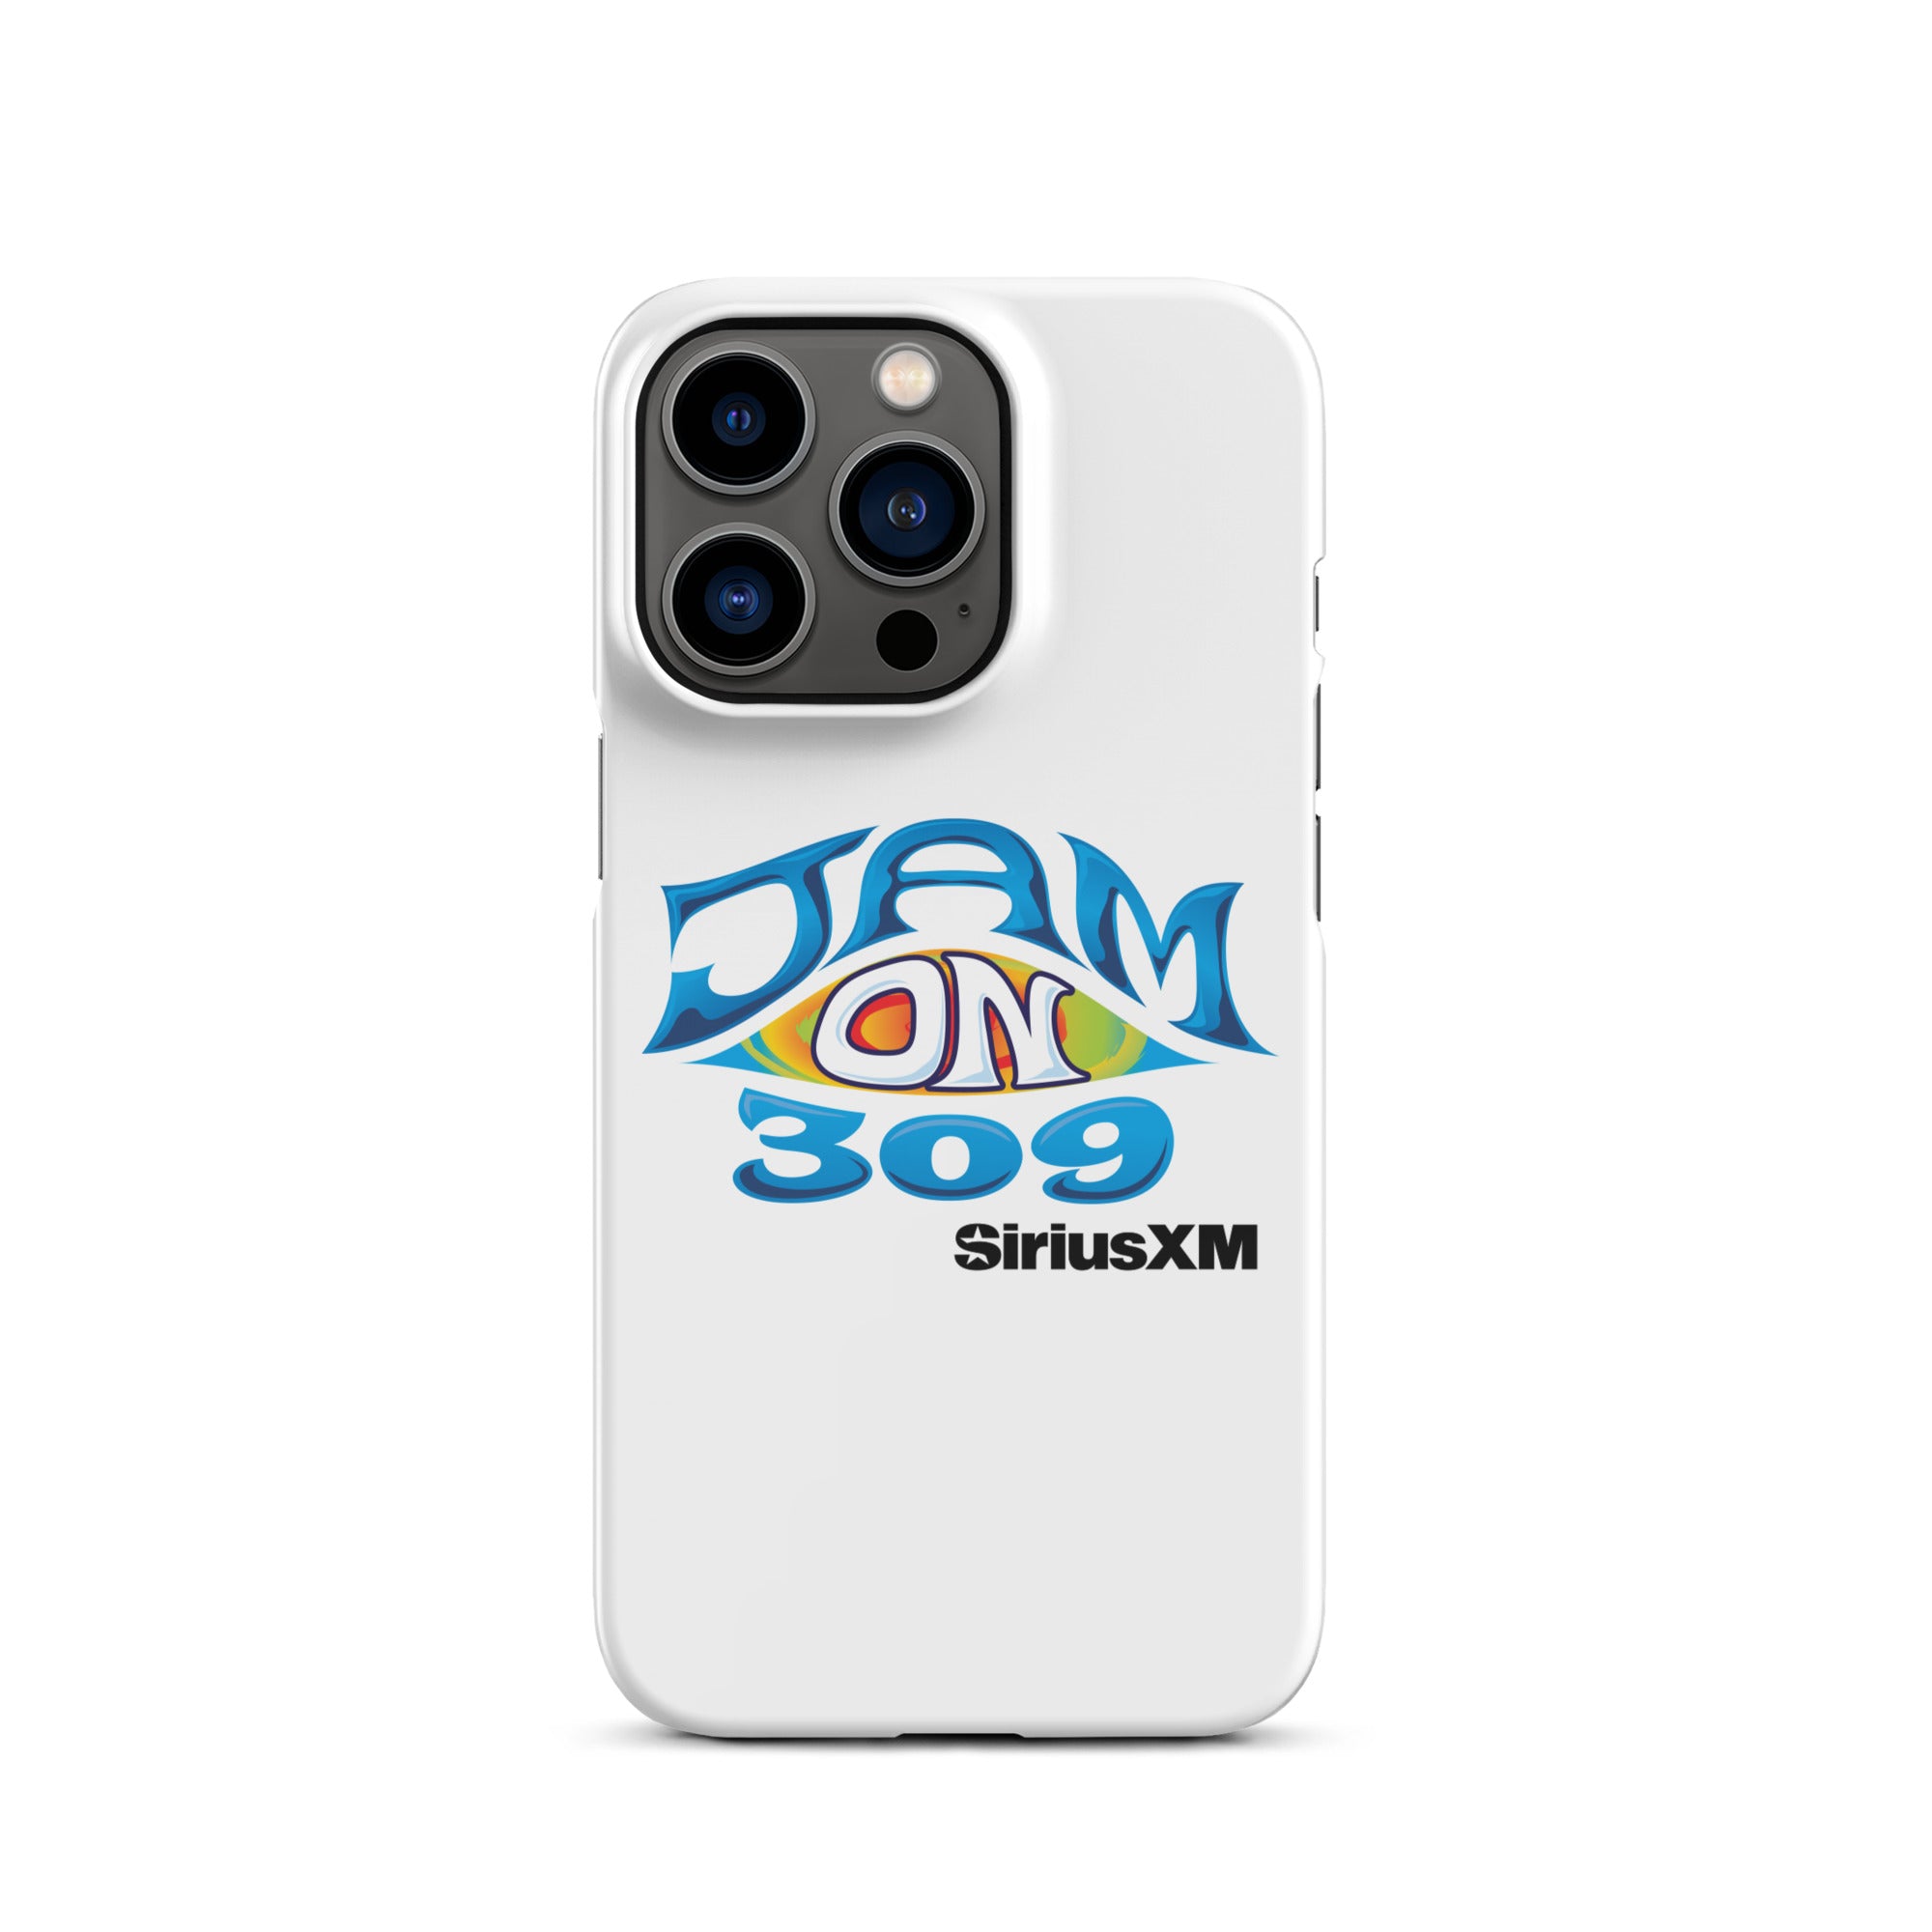 Jam on 309: iPhone® Snap Case